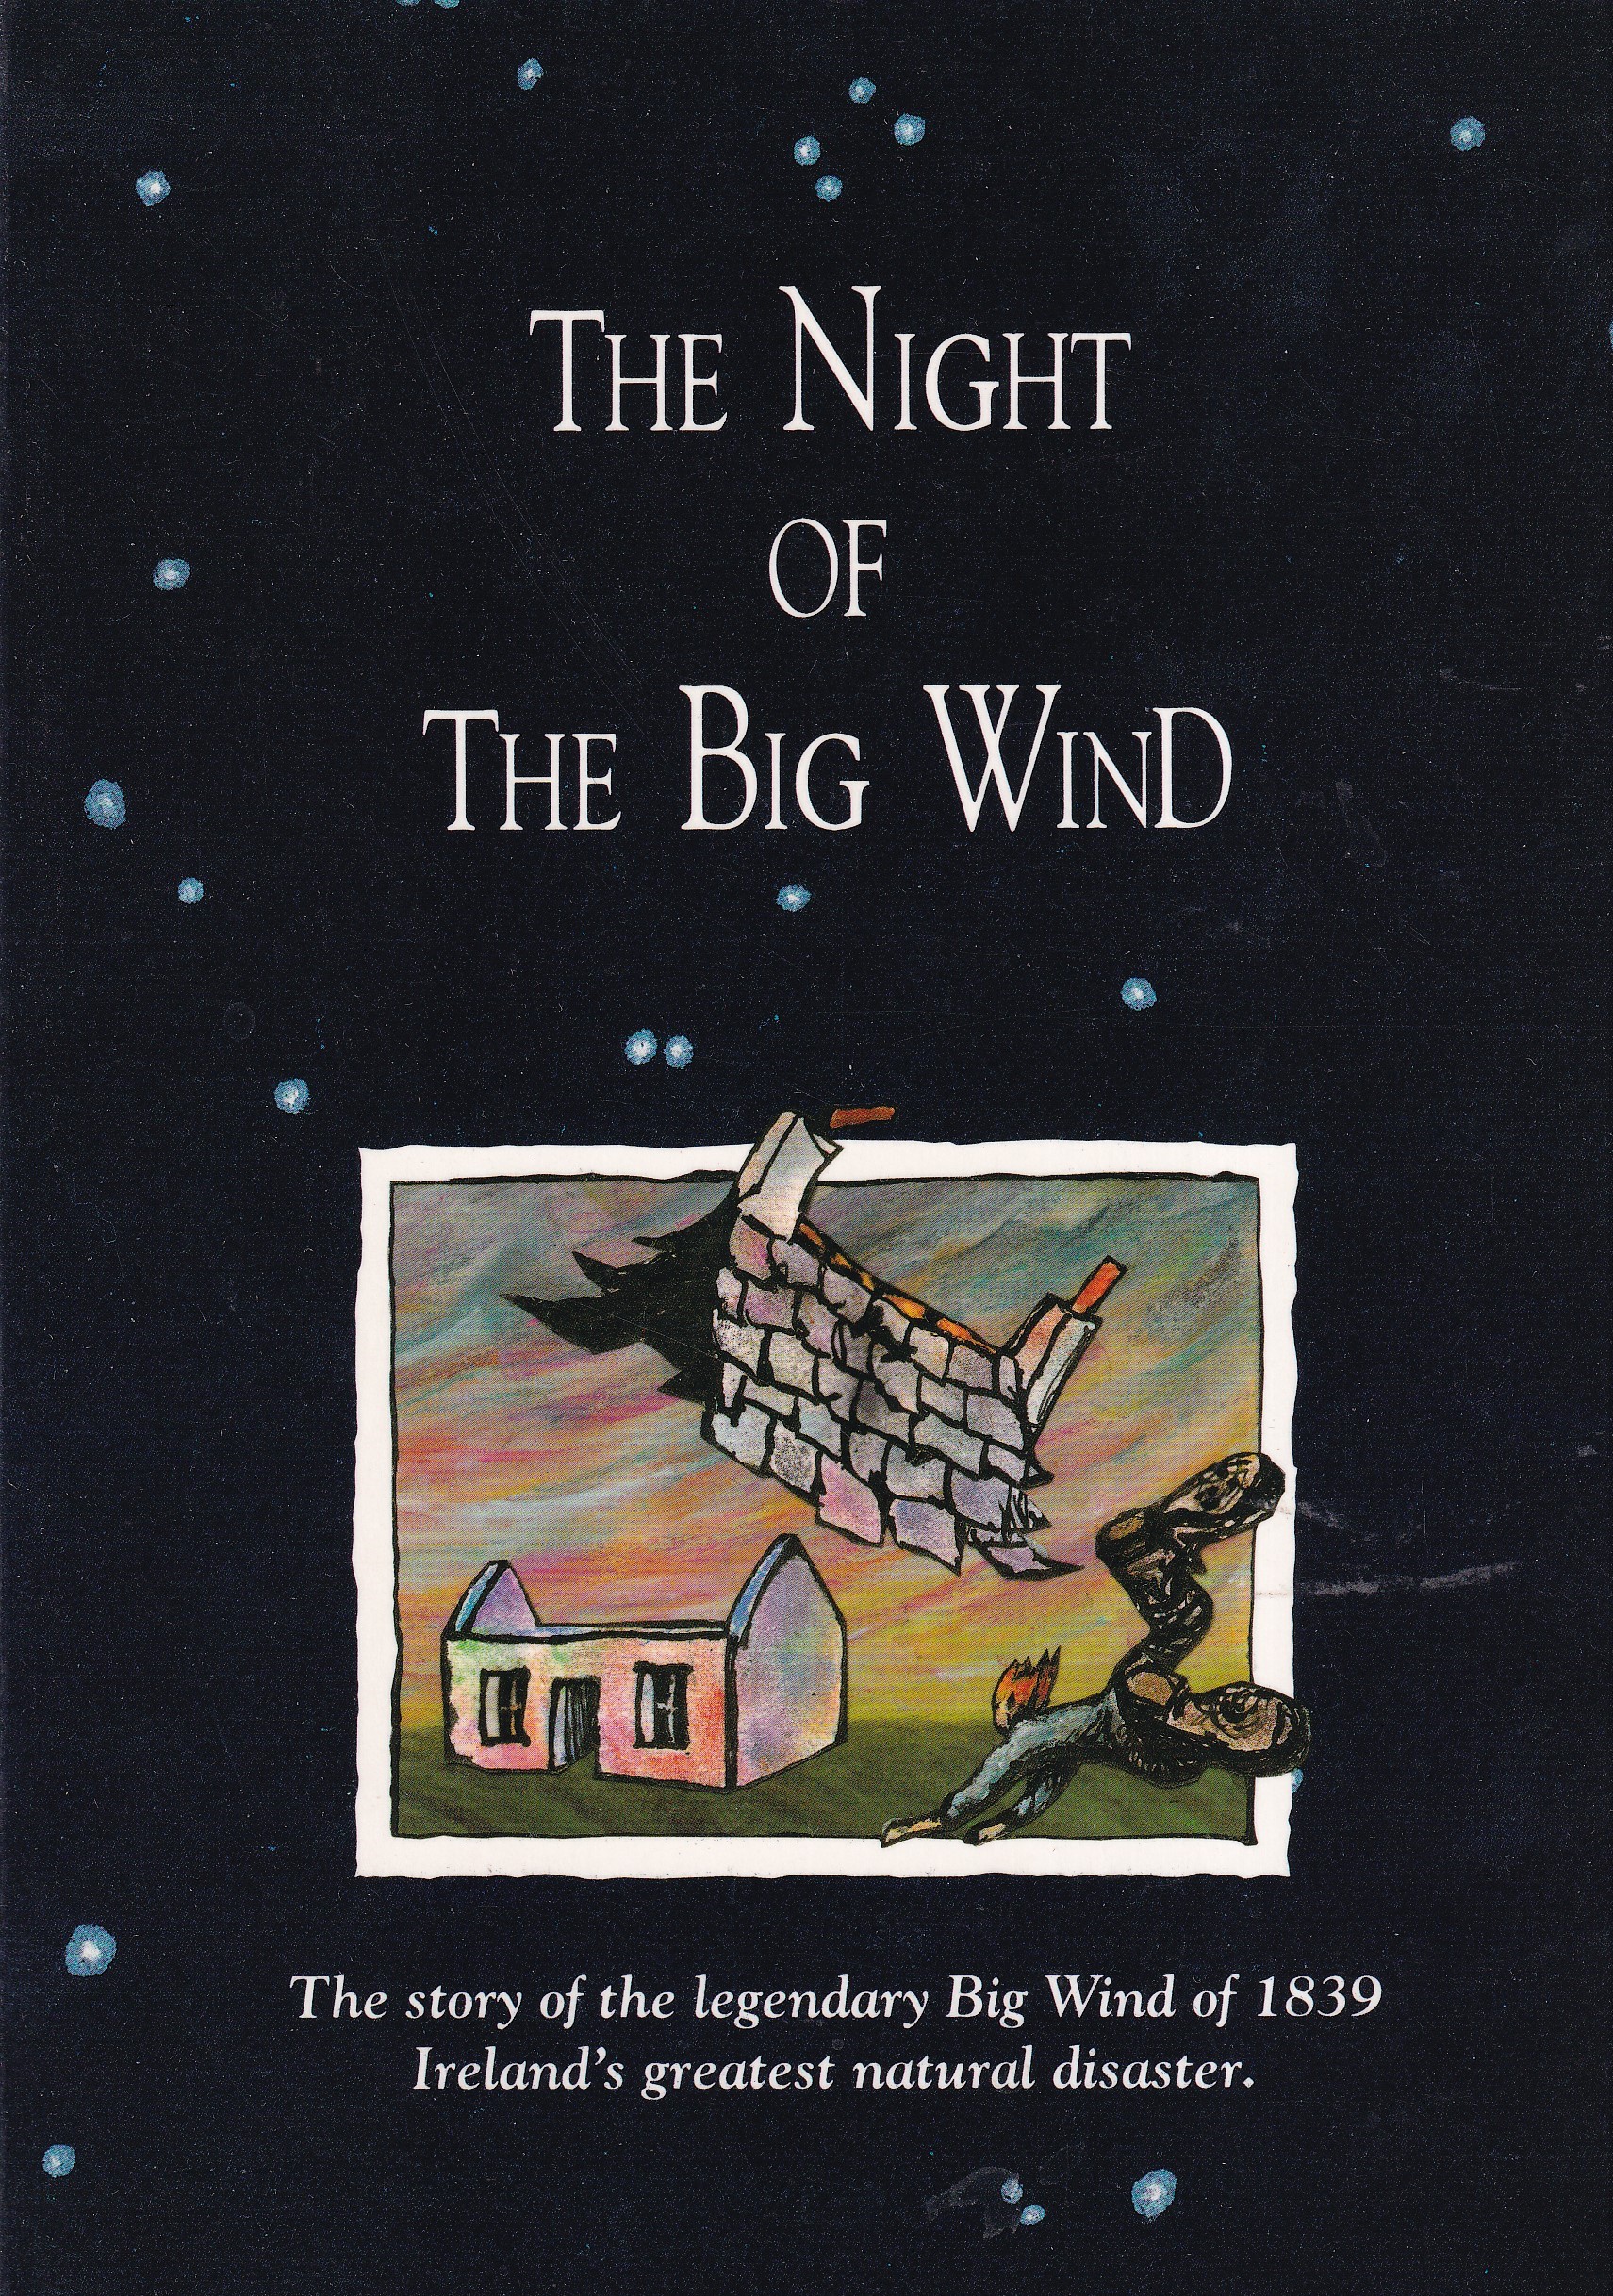 The Night of the Big Wind: The Story of the Legendary Big Wind of 1839- Ireland’s Greatest Natural Disaster by Peter Carr